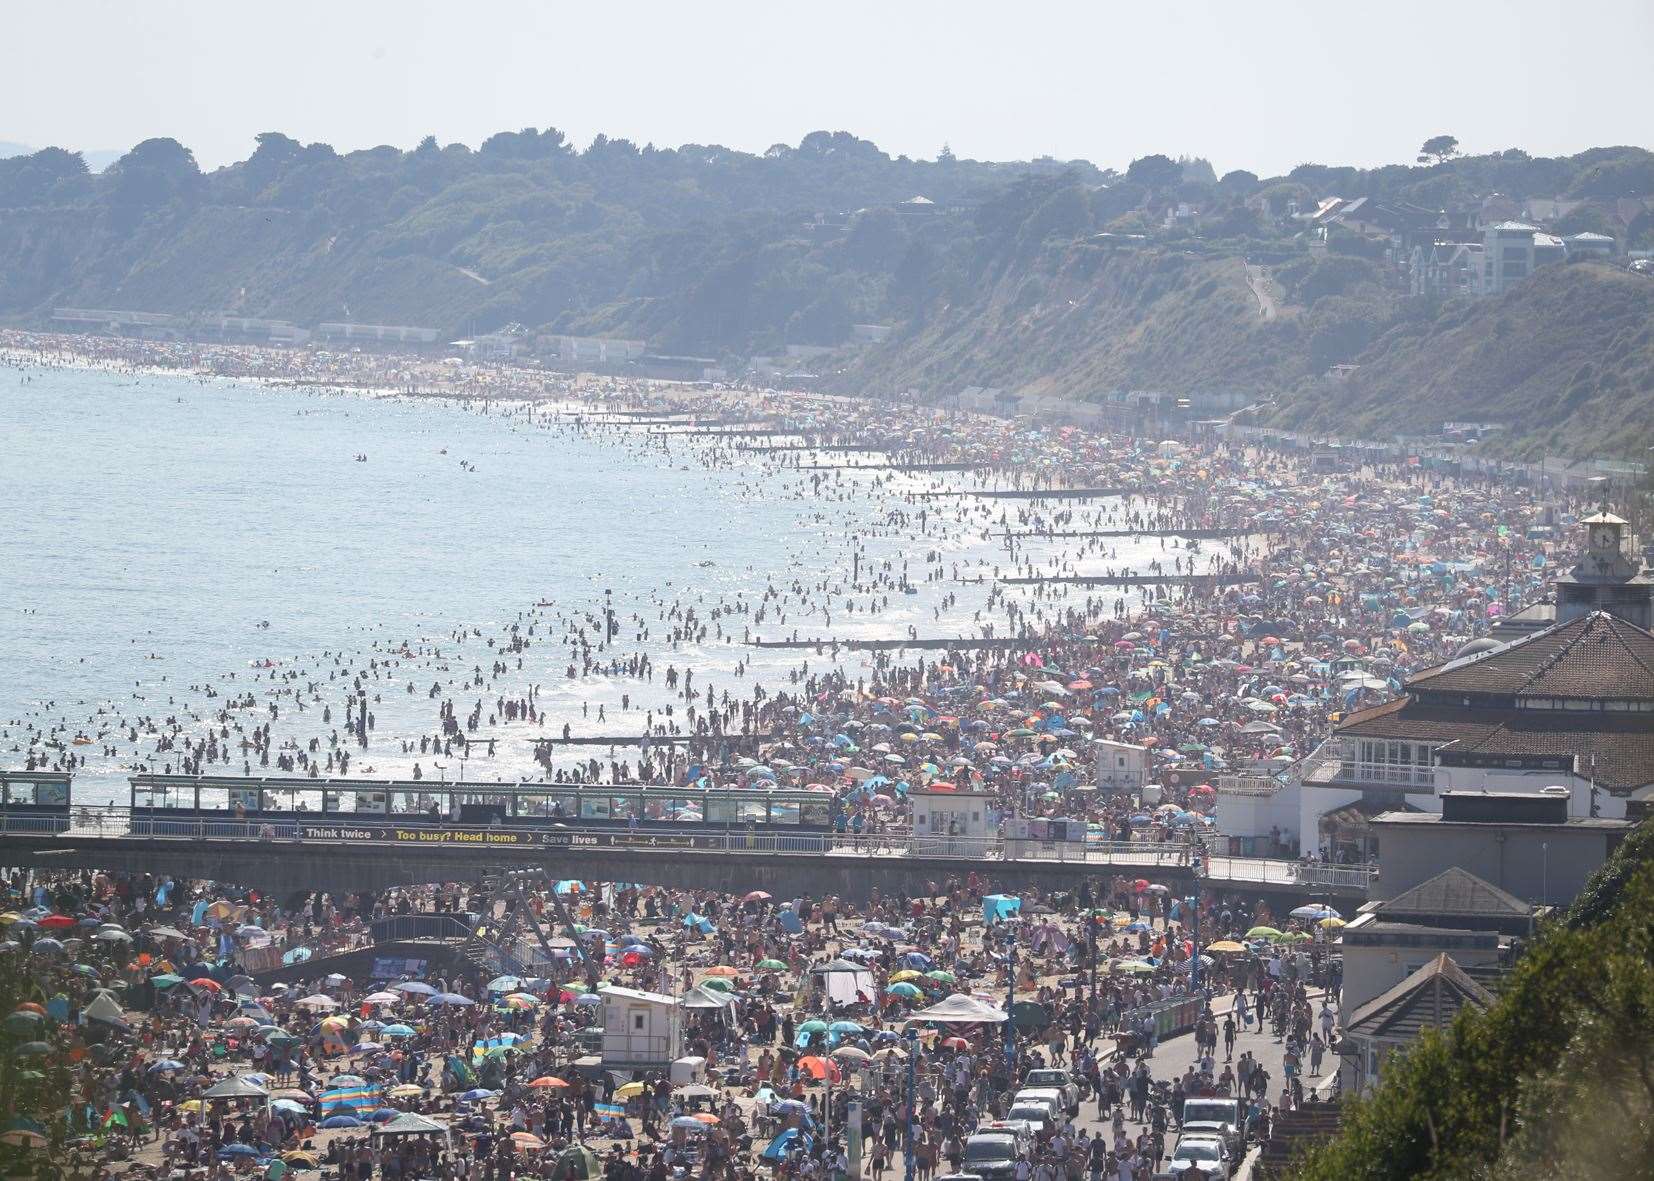 The scene on the beach in Bournemouth, Dorset, on Wednesday (Andrew Matthews/PA)